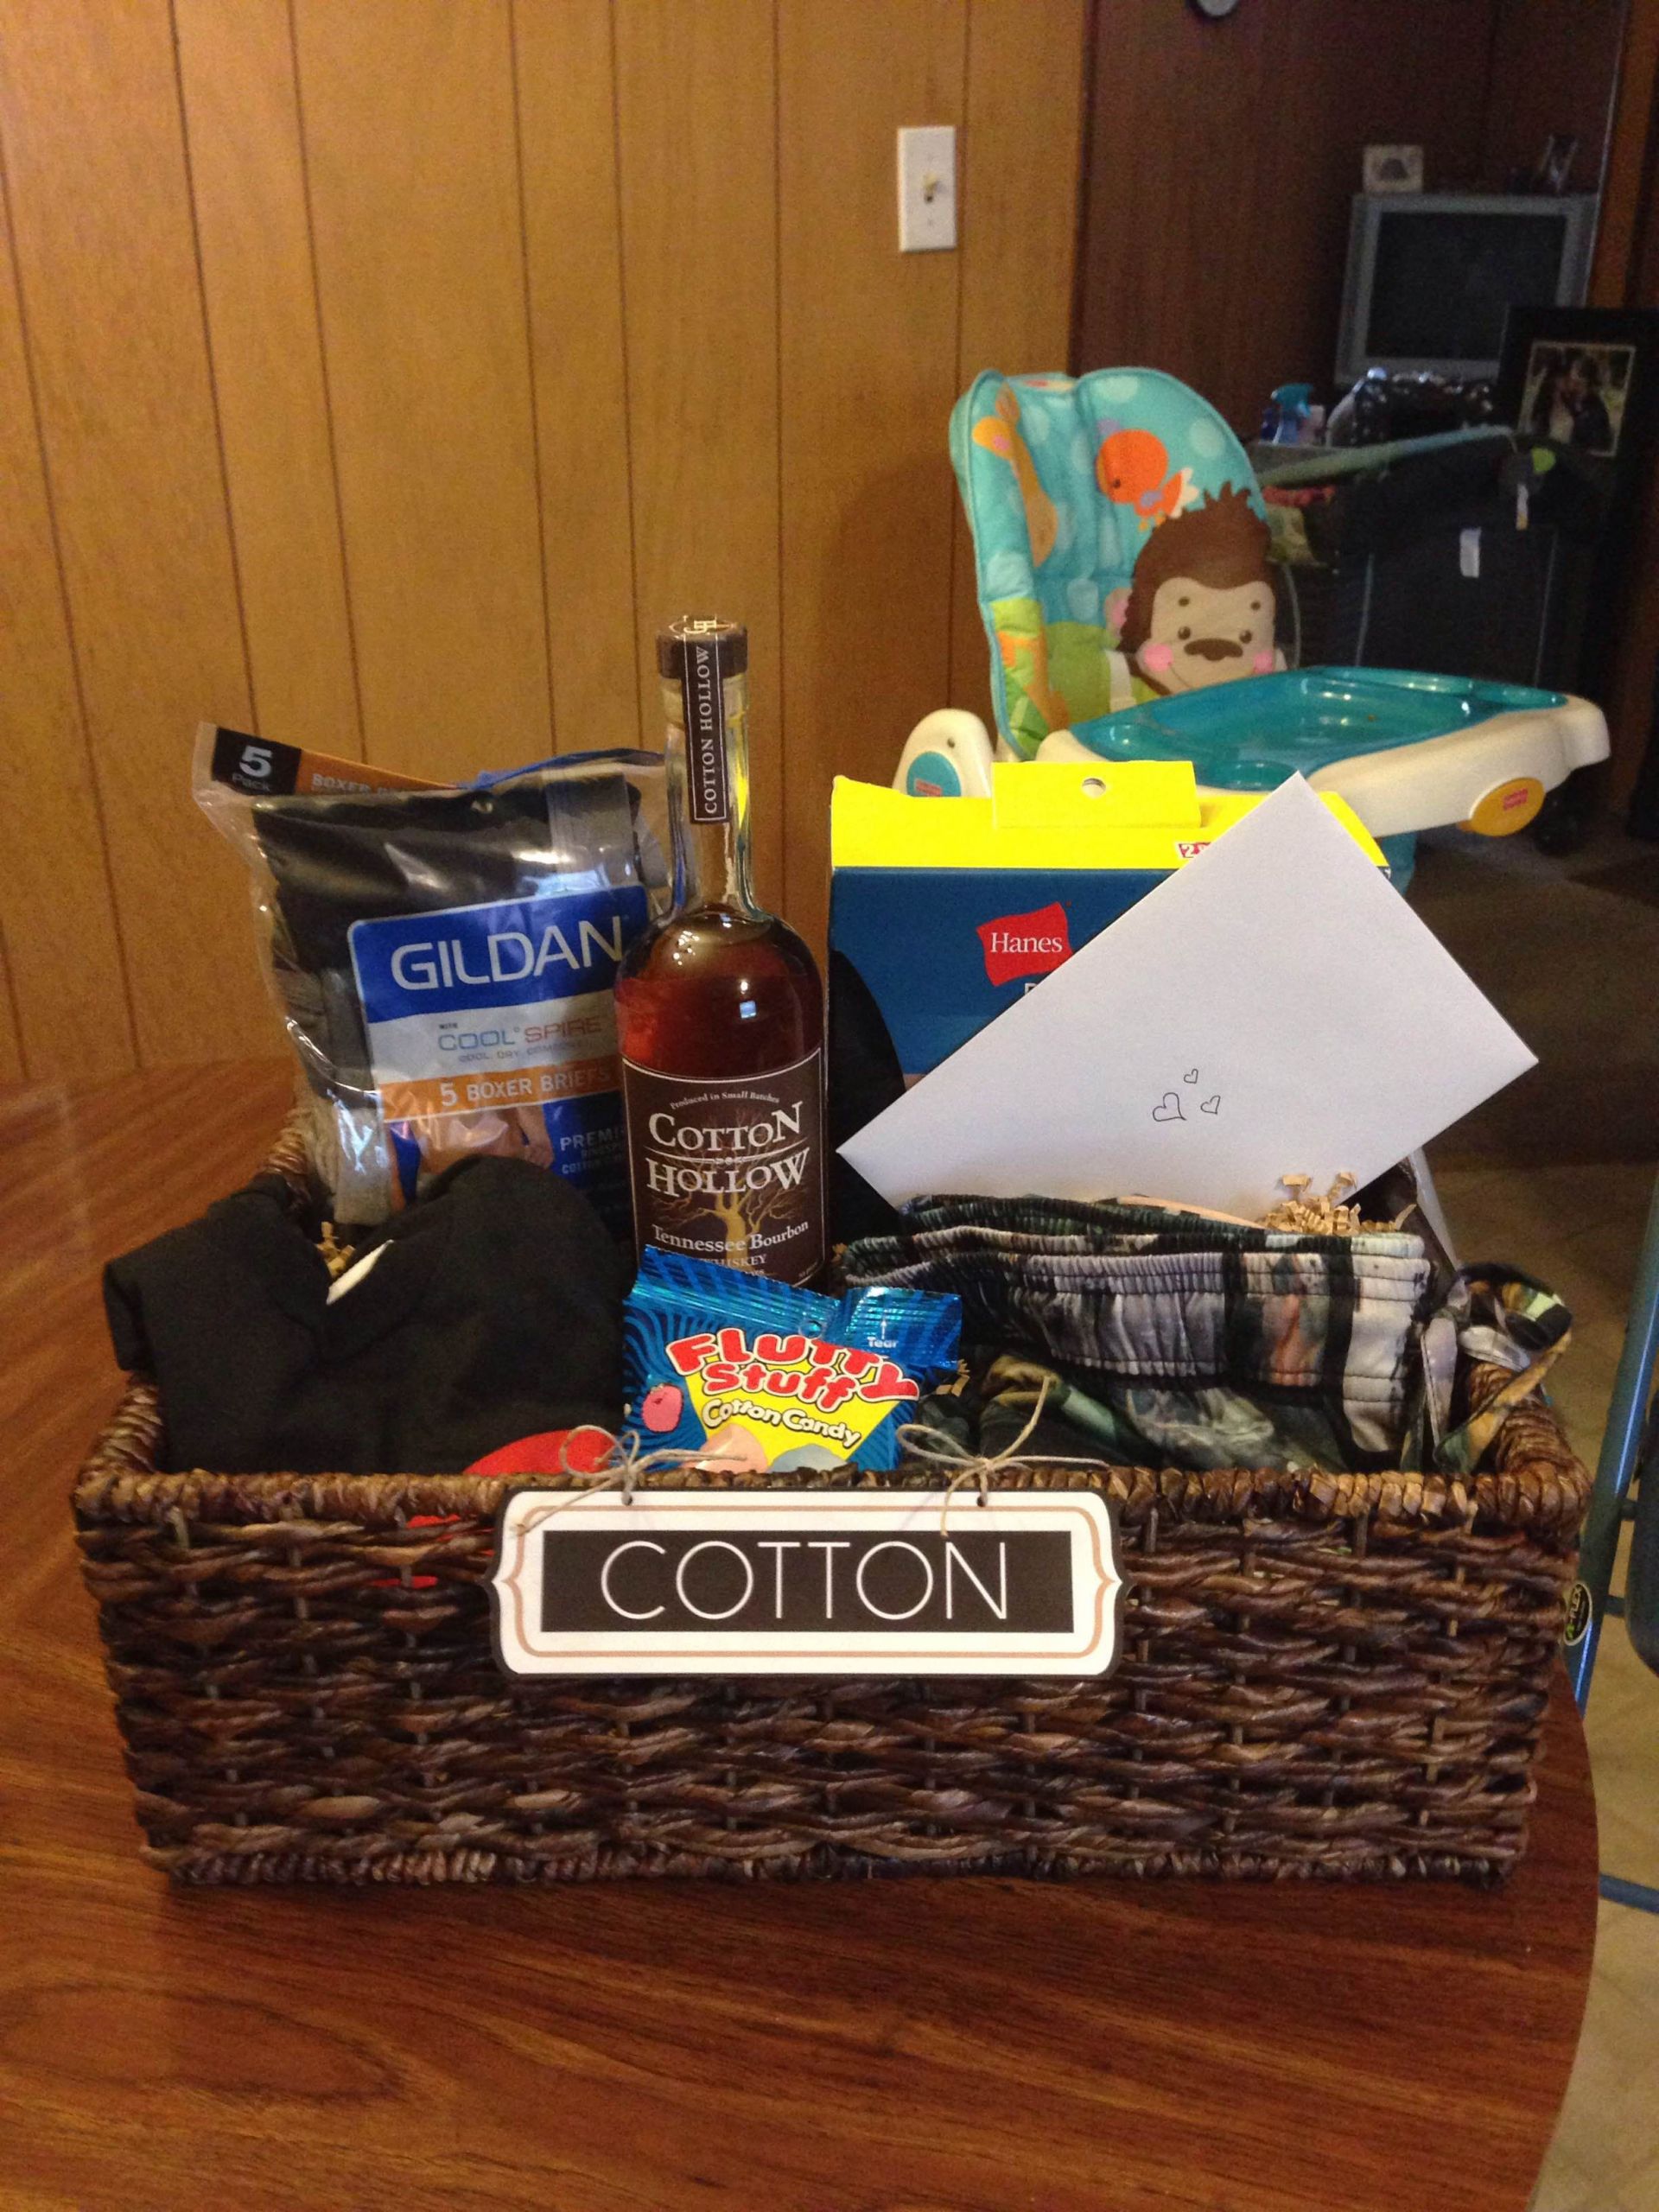 Second Anniversary Cotton Gift Ideas
 "Cotton" t basket I put to her for my husband for our